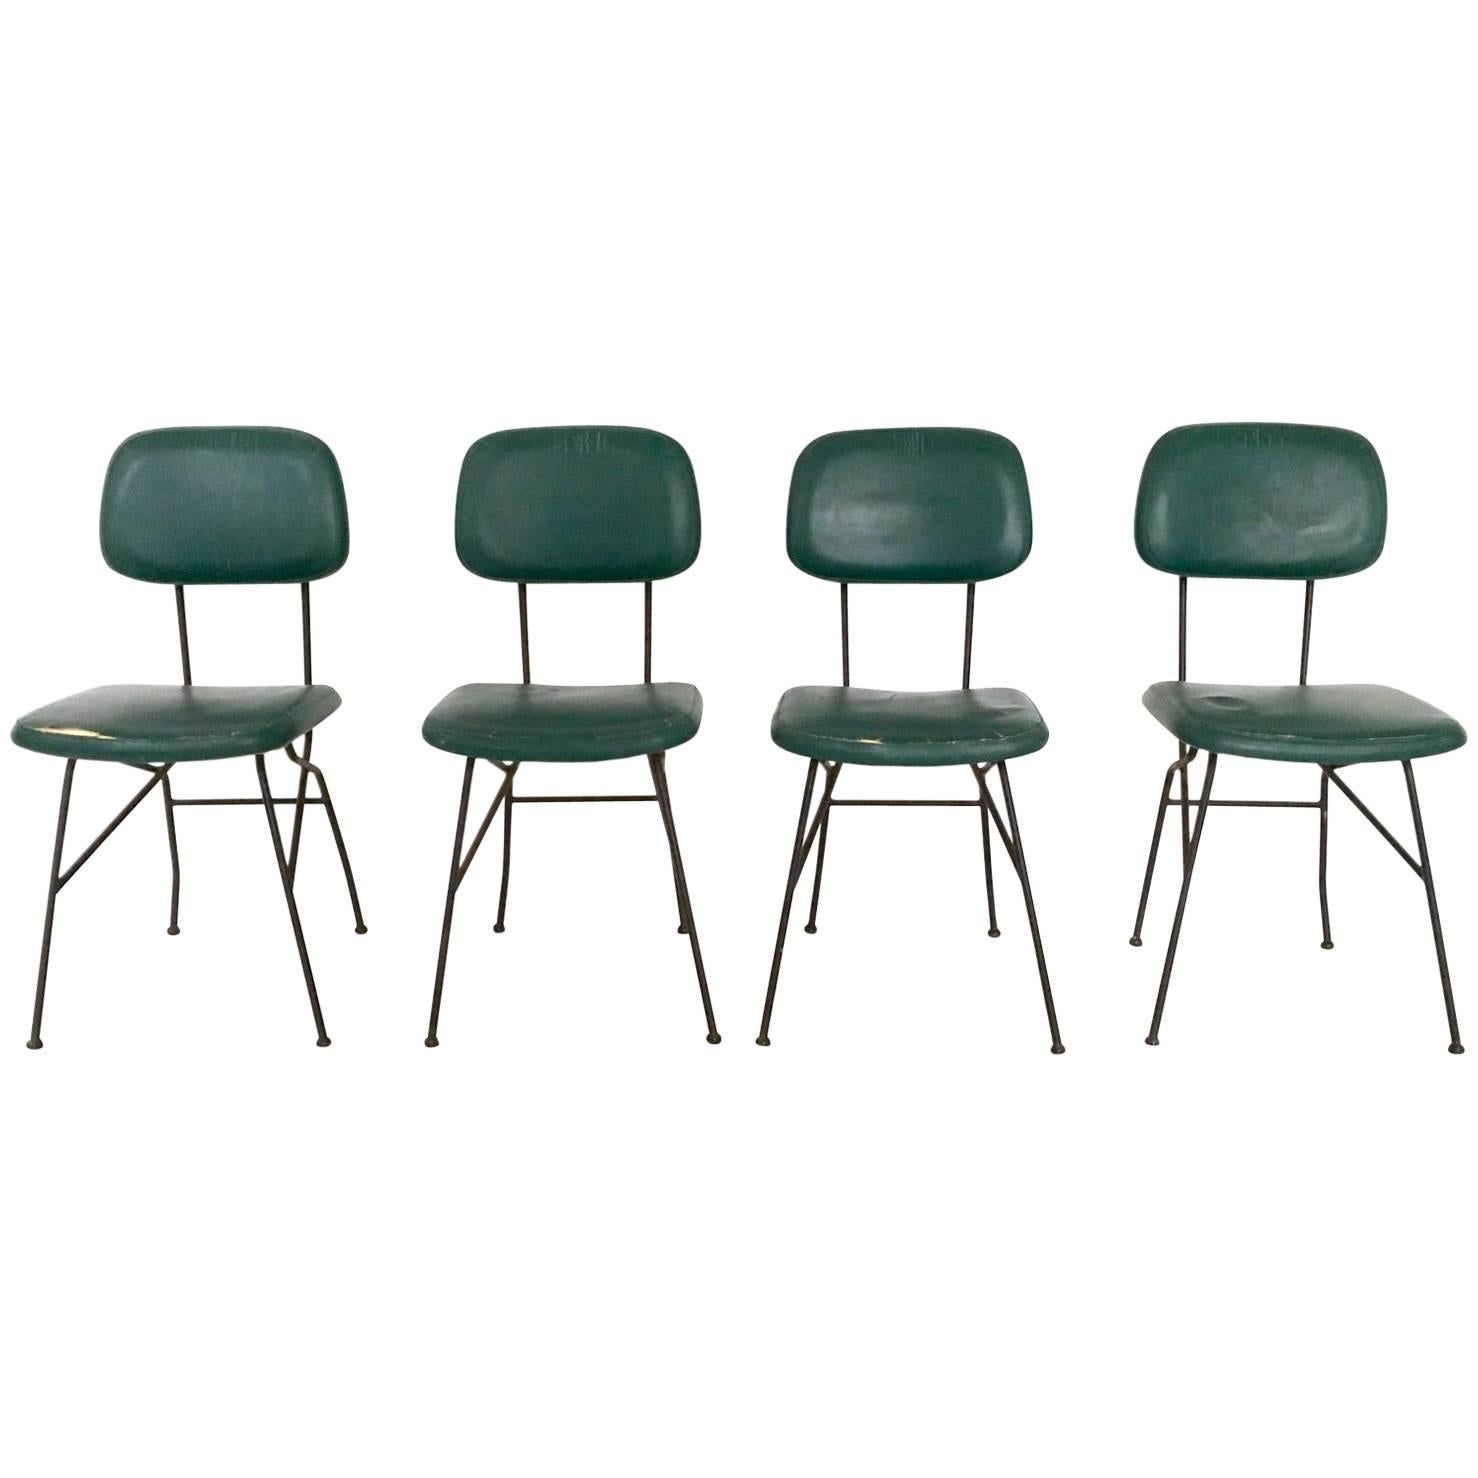 Set of Four Metal and Skai Chairs Ascribable to Gastone Rinaldi for Rima, 1950s